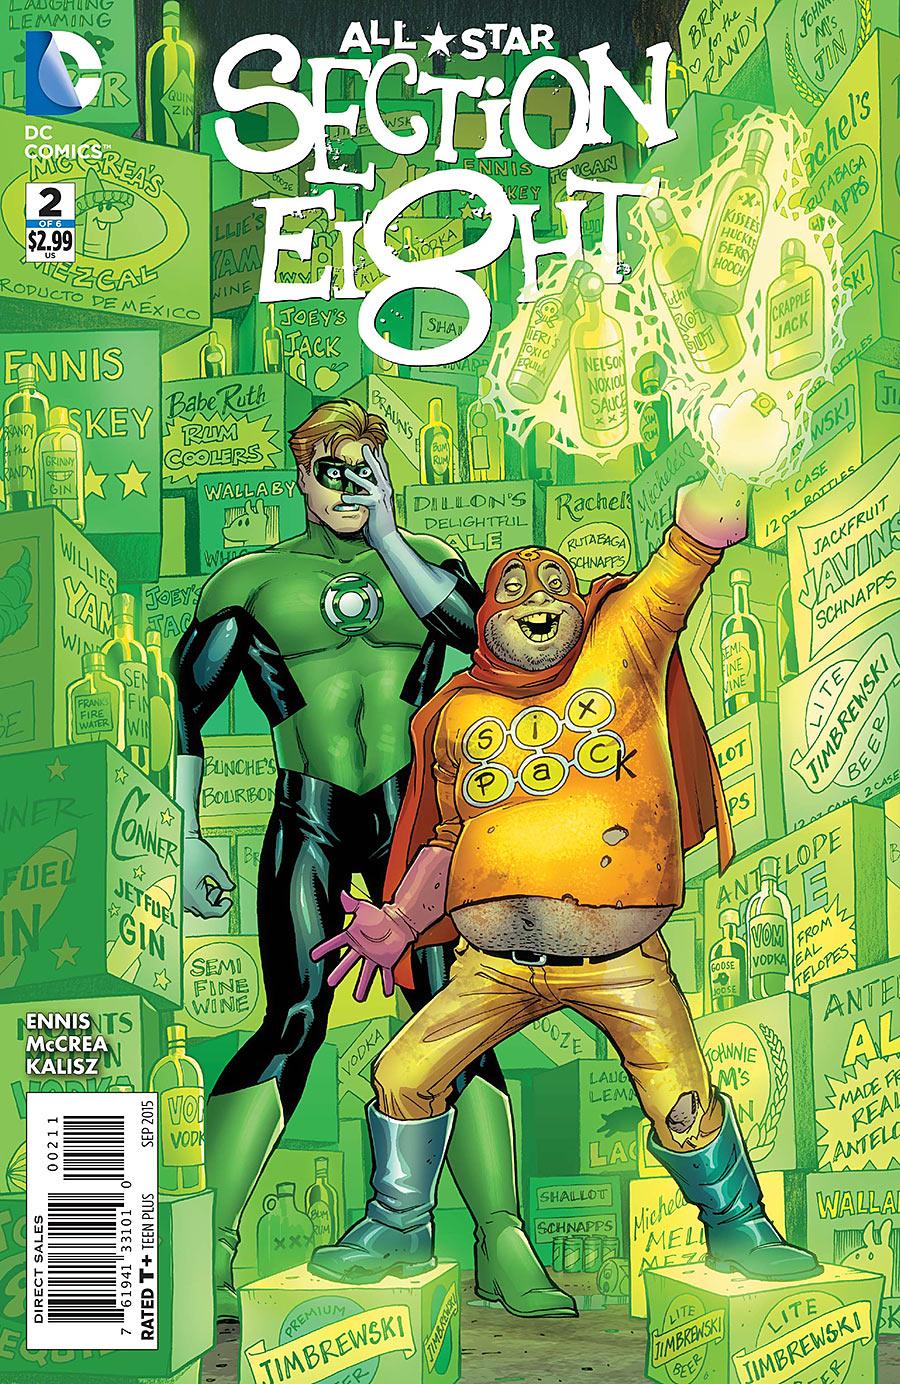 All Star Section Eight Vol. 1 #2